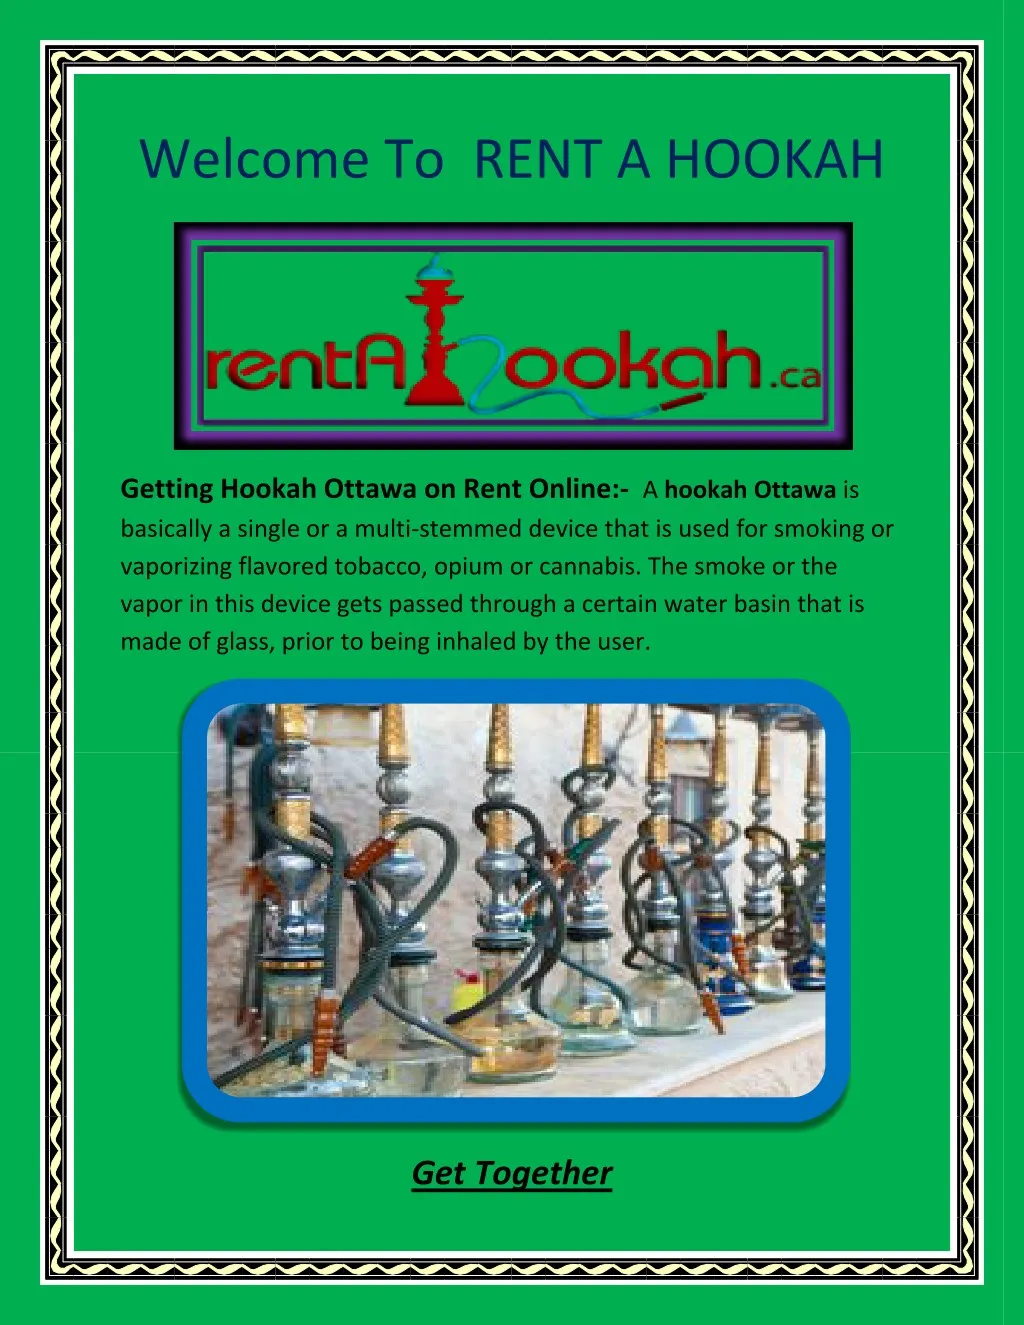 welcome to rent a hookah